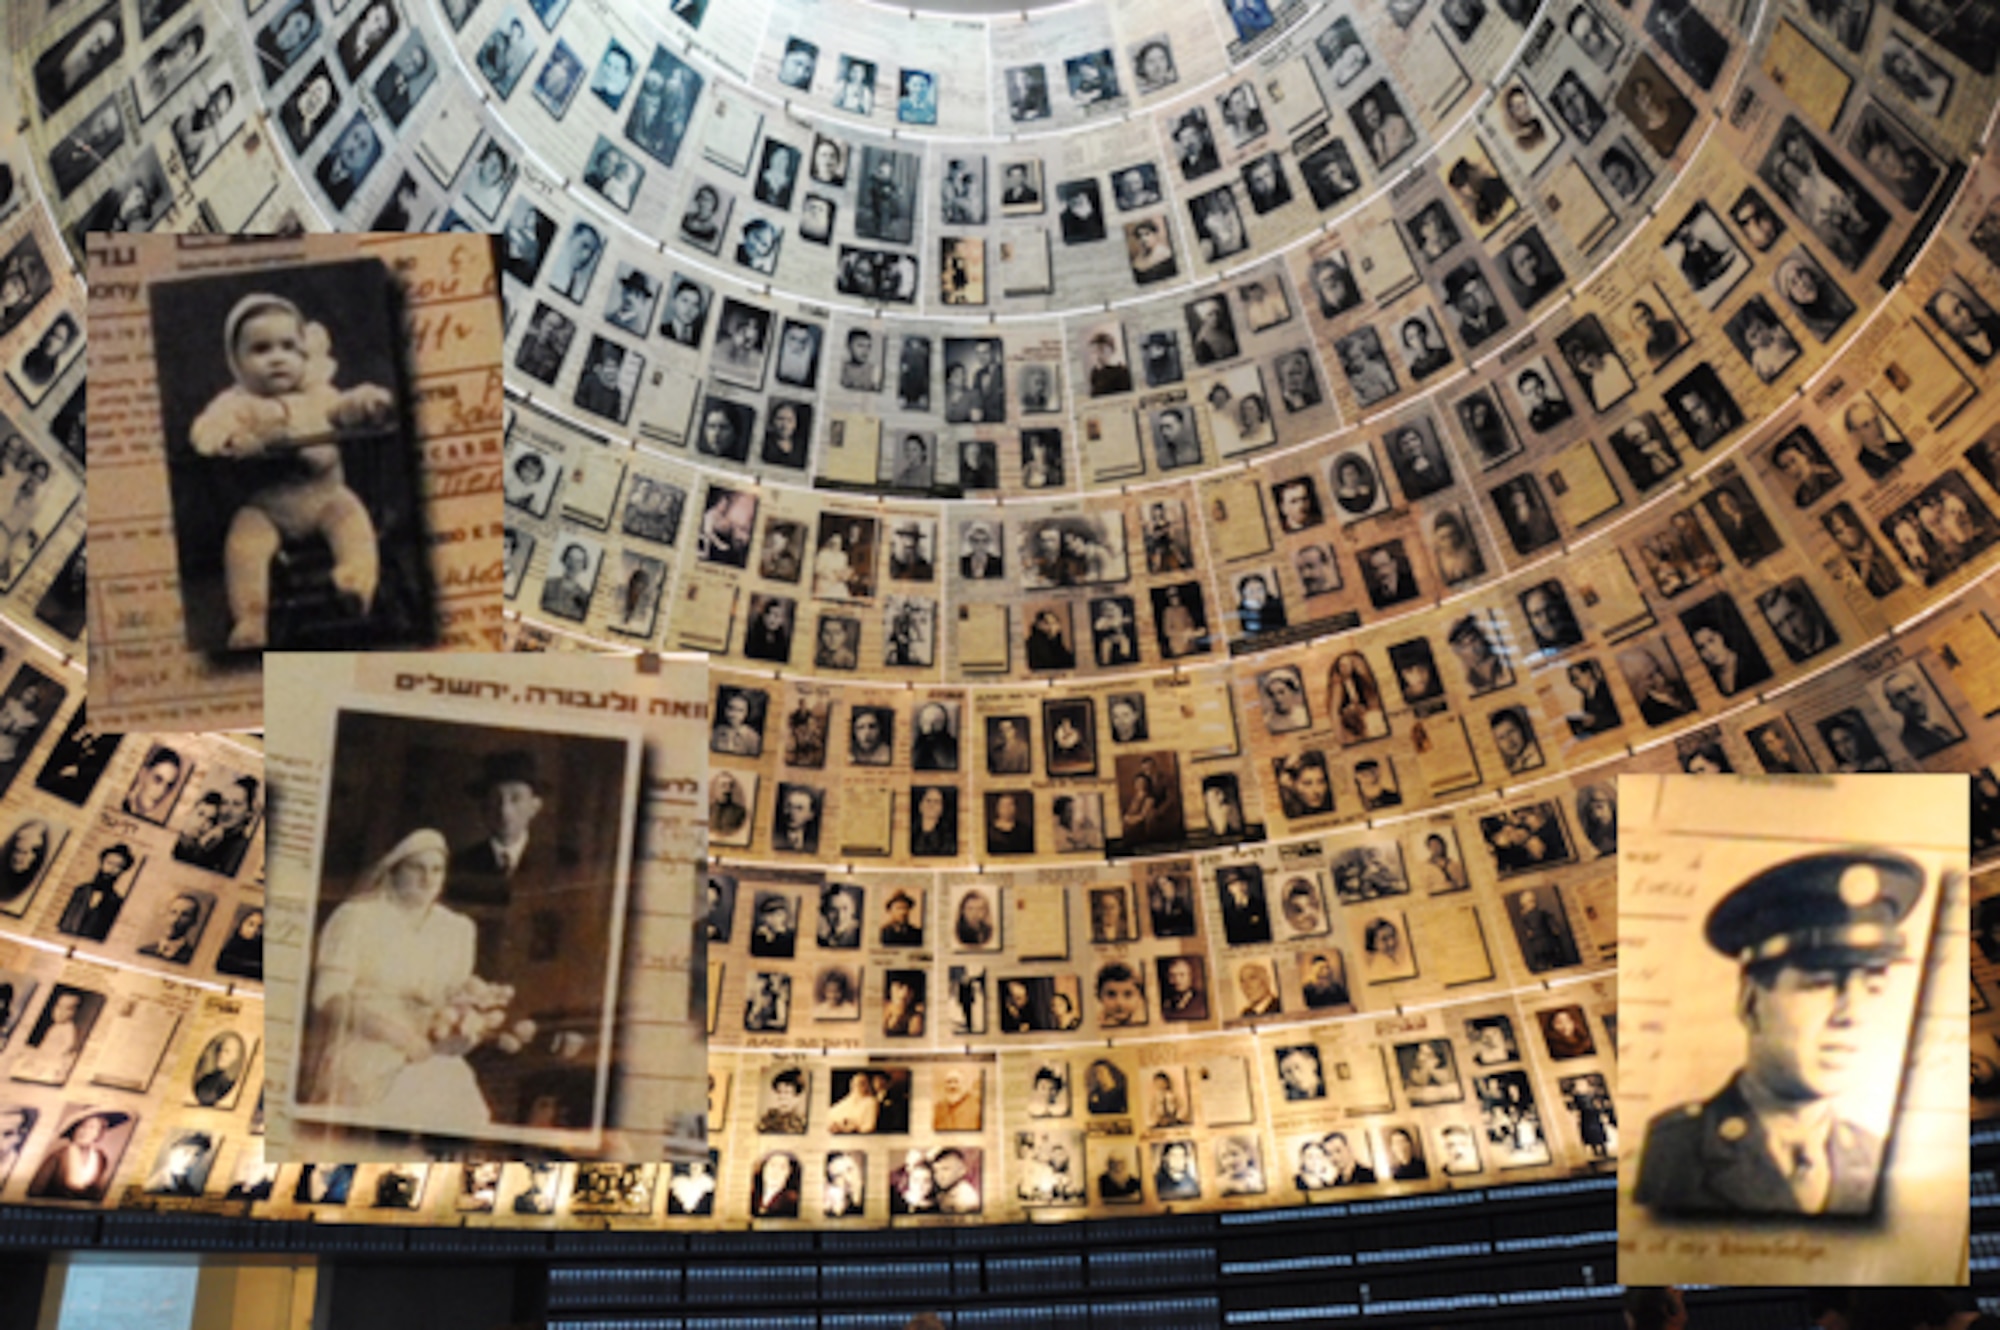 The conical Hall of Names near the end of Yad Vashem, the Holocaust Museum in Jerusalem, shows hundreds of personal pictures of those who perished during the Holocaust. (Courtesy photo)
